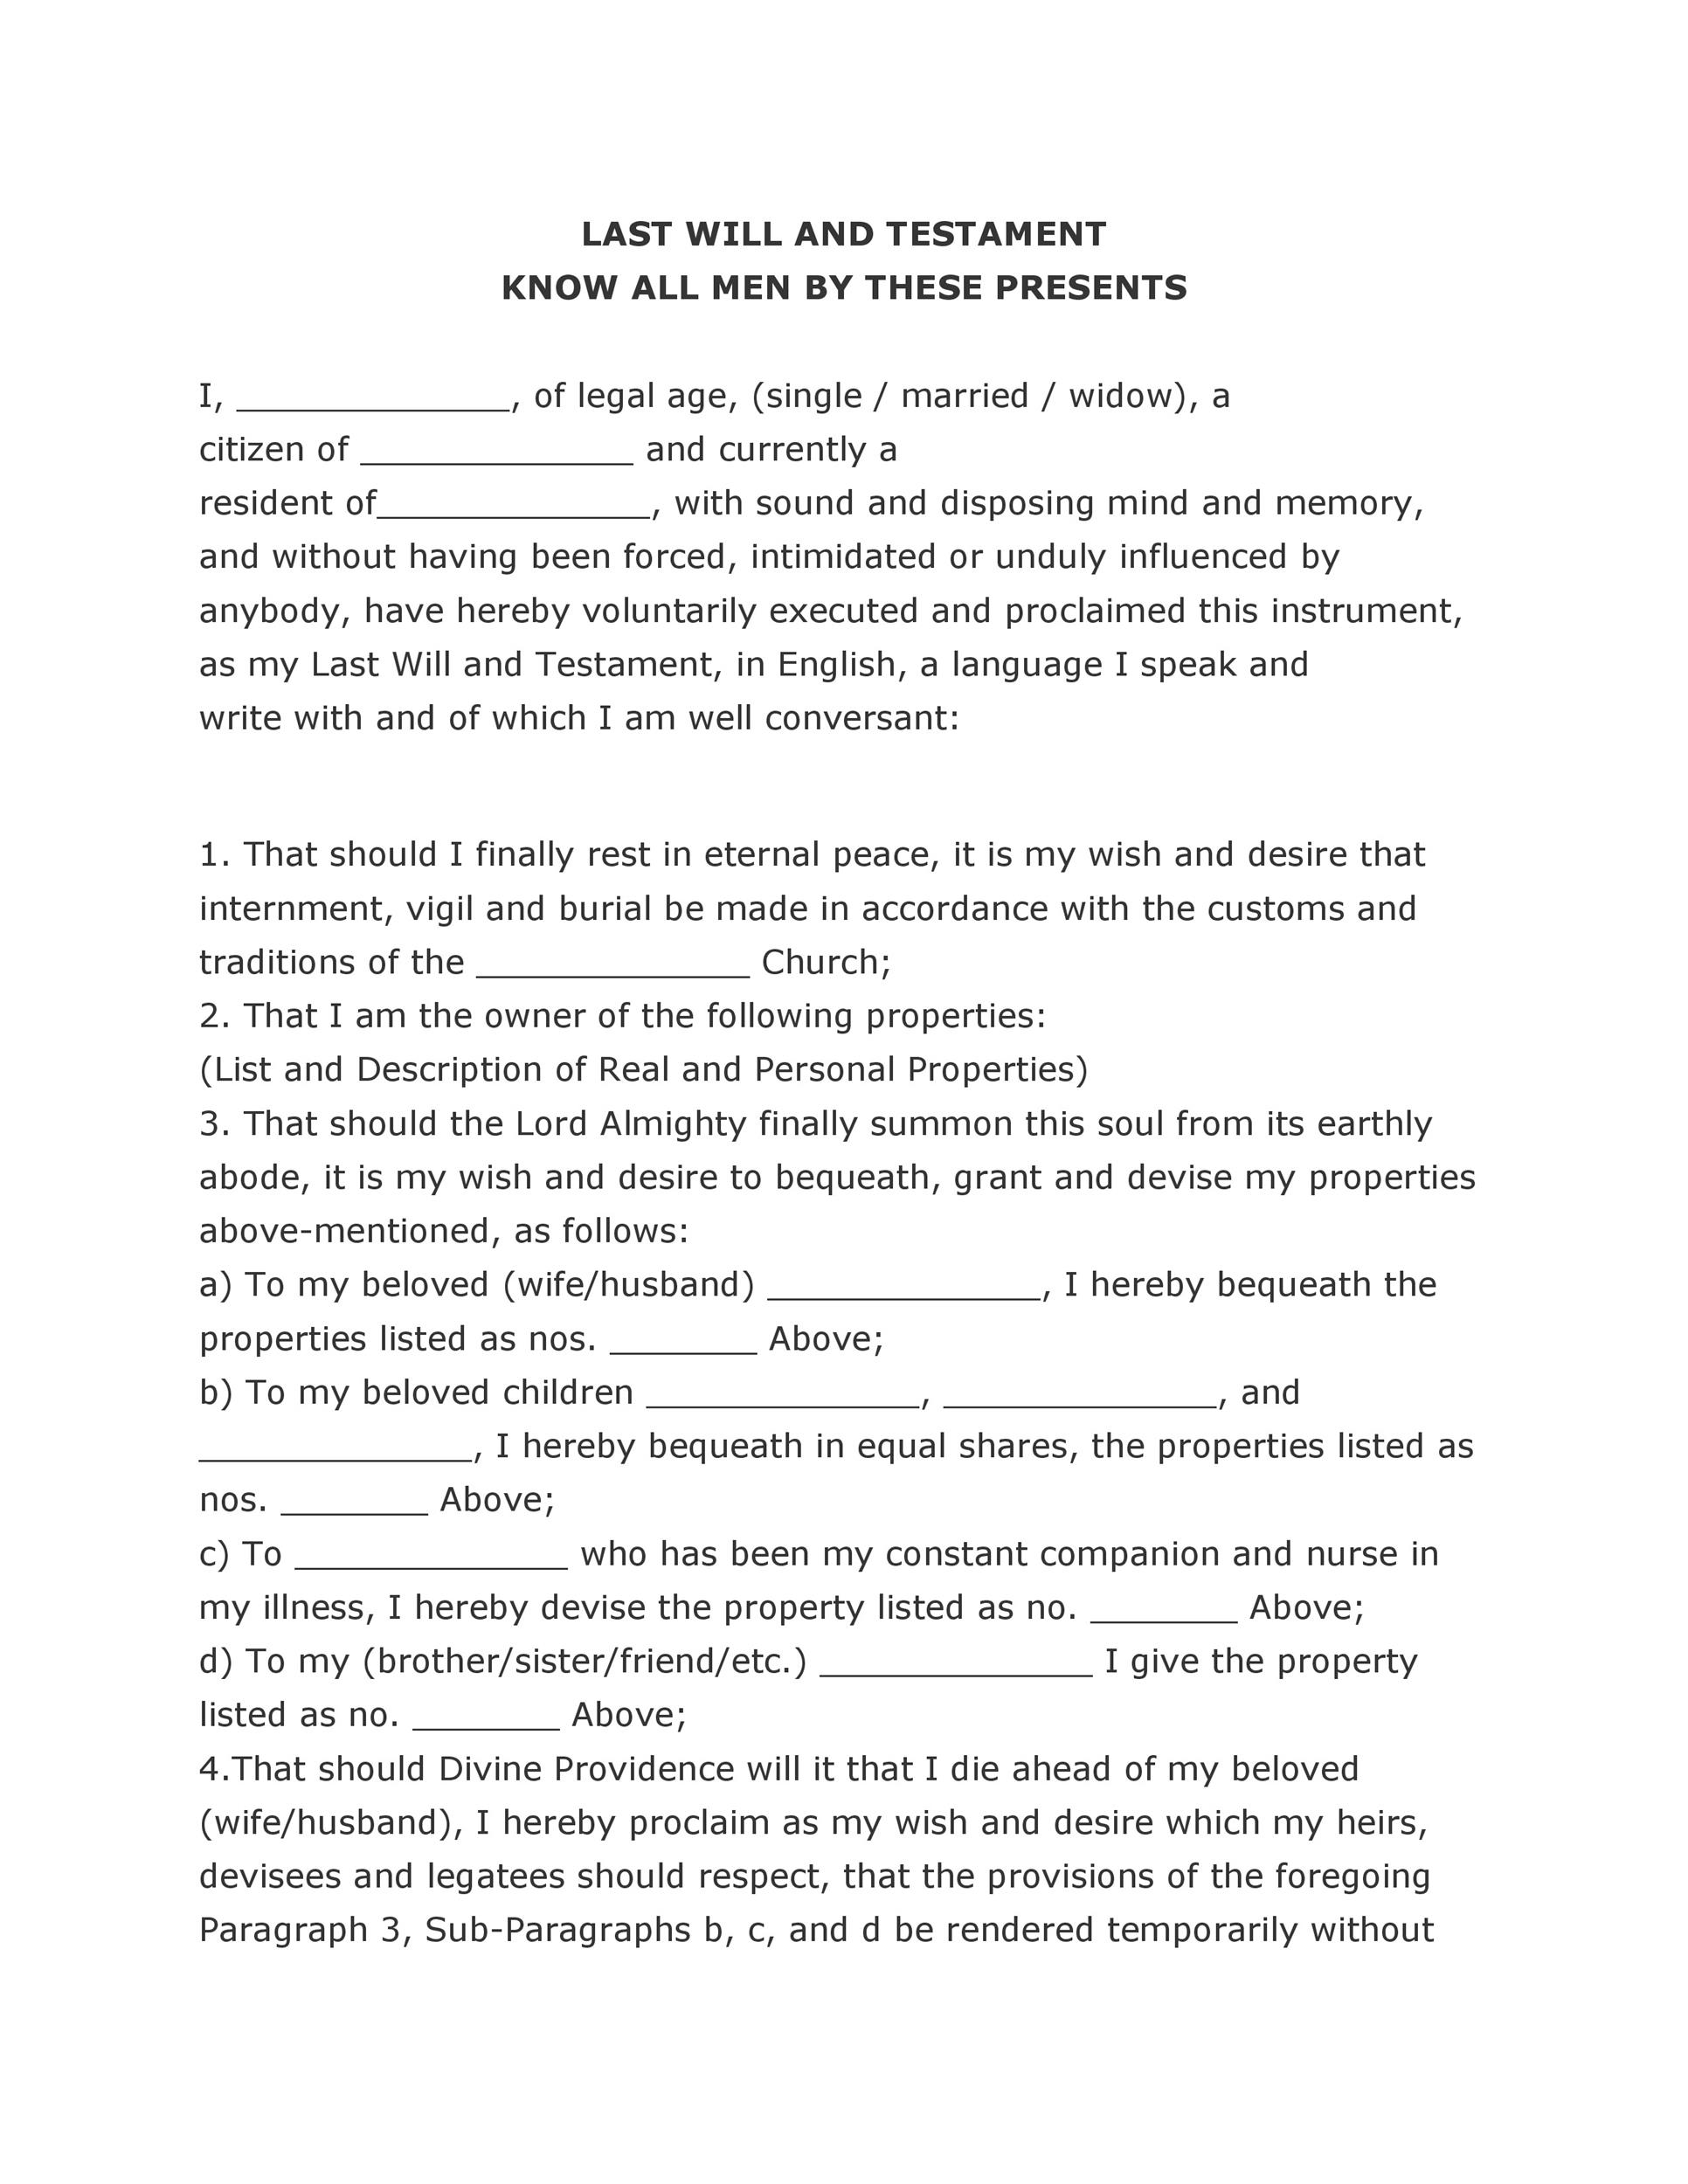 39 Last Will And Testament Forms Templates TemplateLab